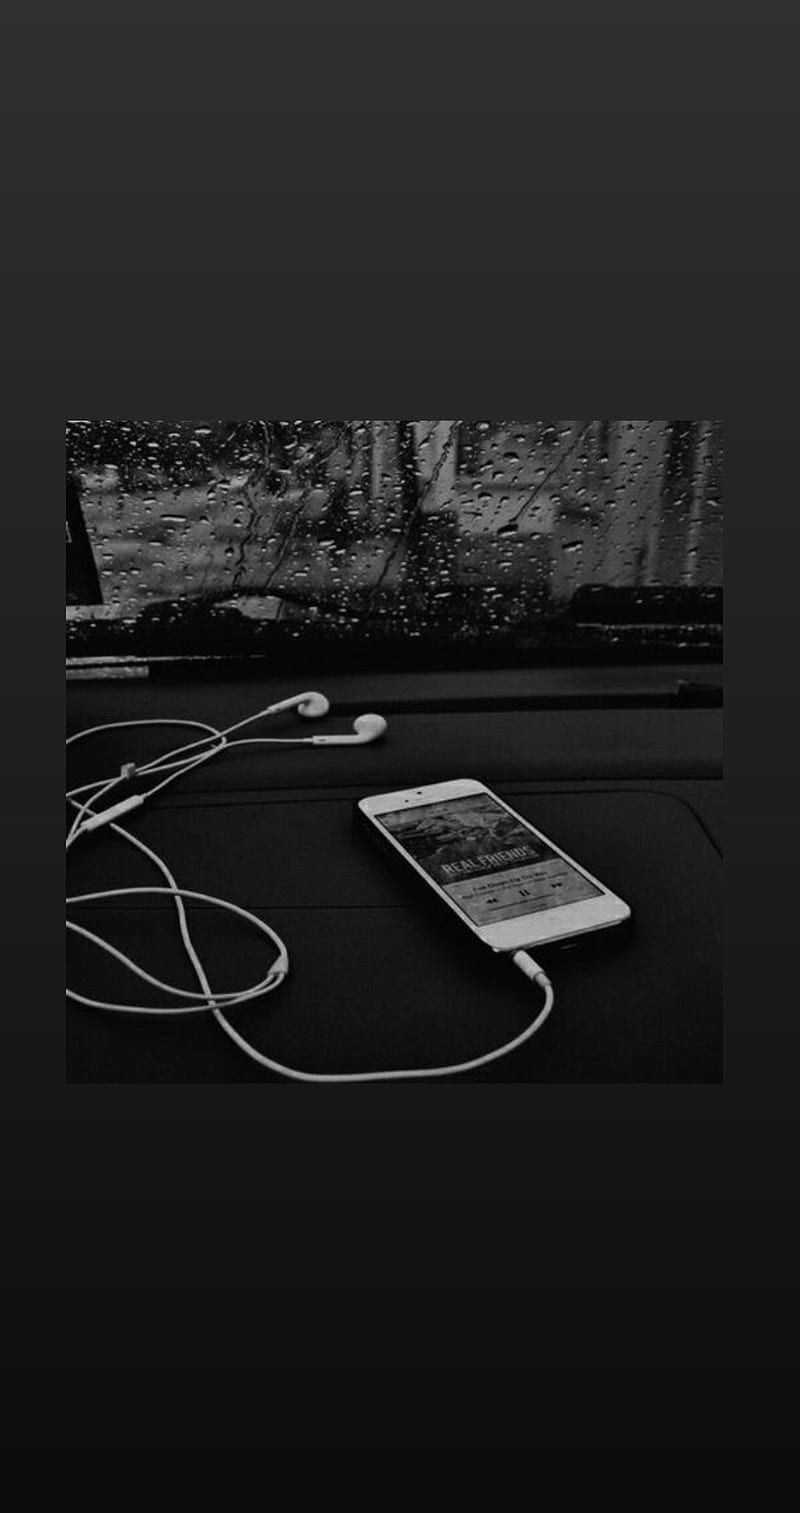 Spotify Wallpaper Music  Songs Music poster ideas Iphone wallpaper  music